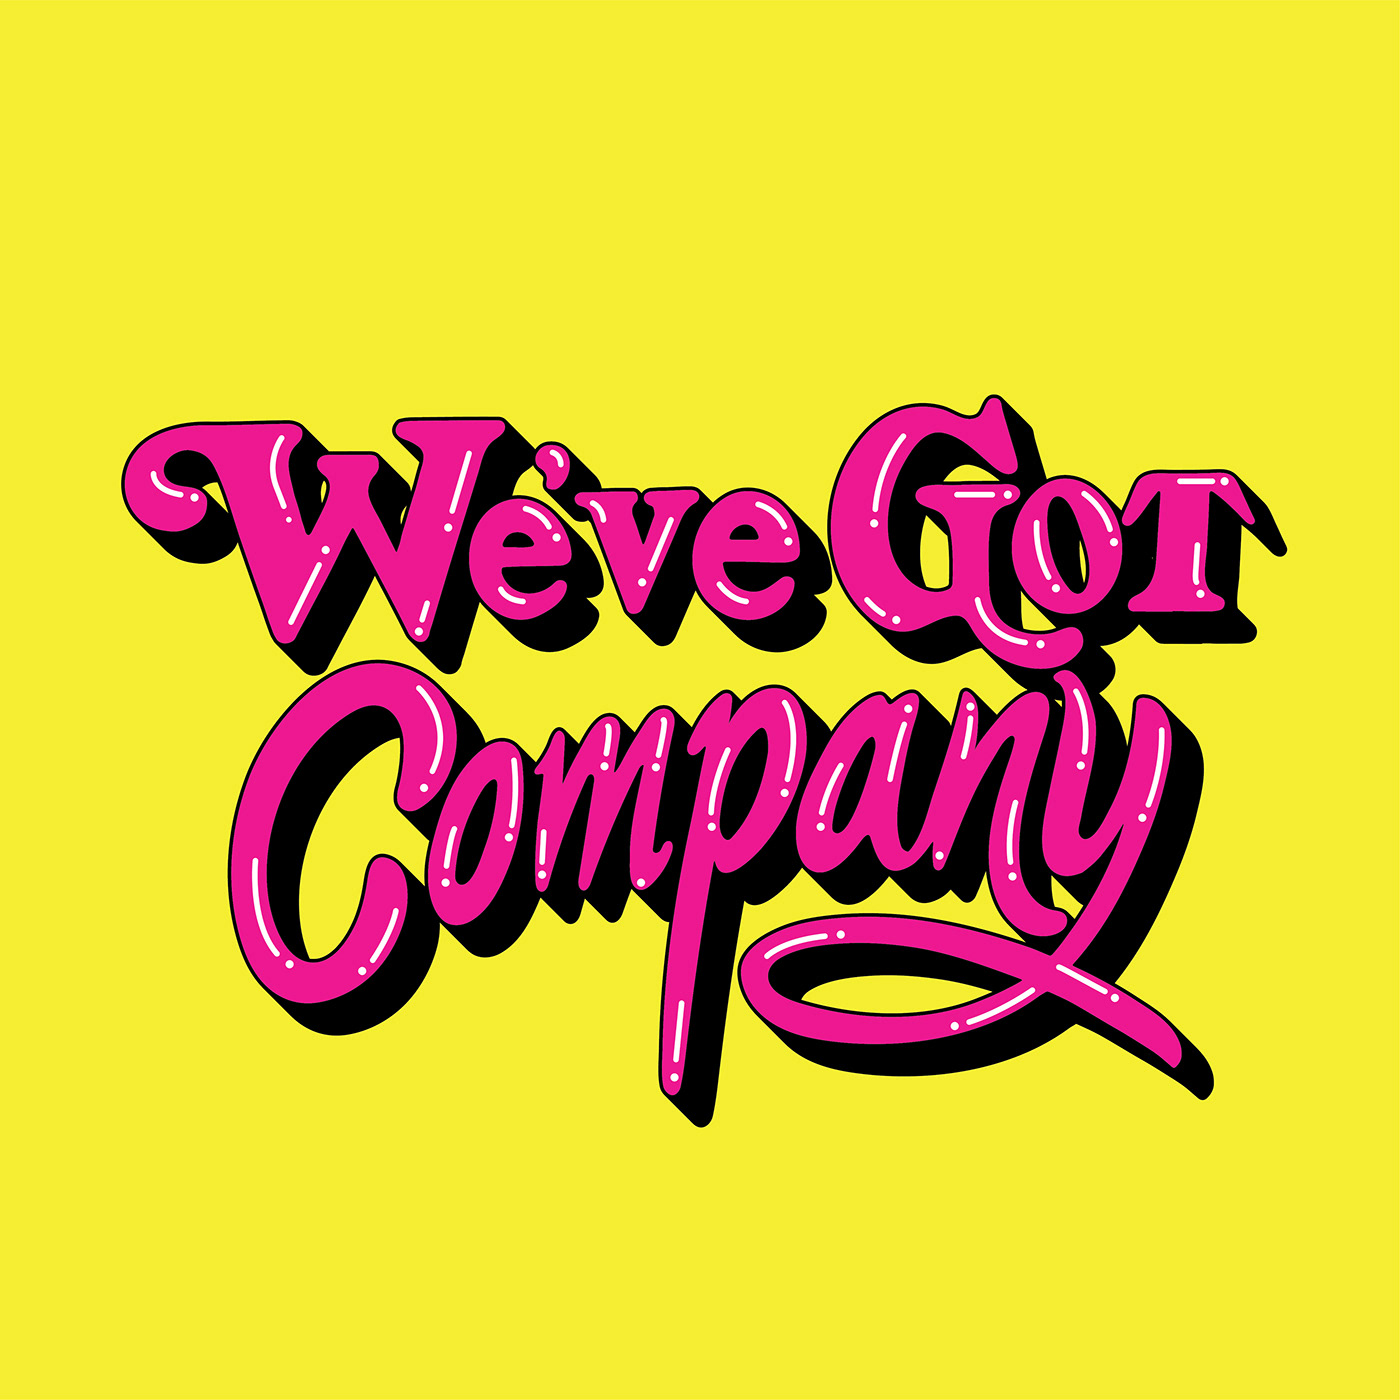 amazon music amazonmusic Comedy show film title lettering tv show tv title design Twitch typography   we've got company